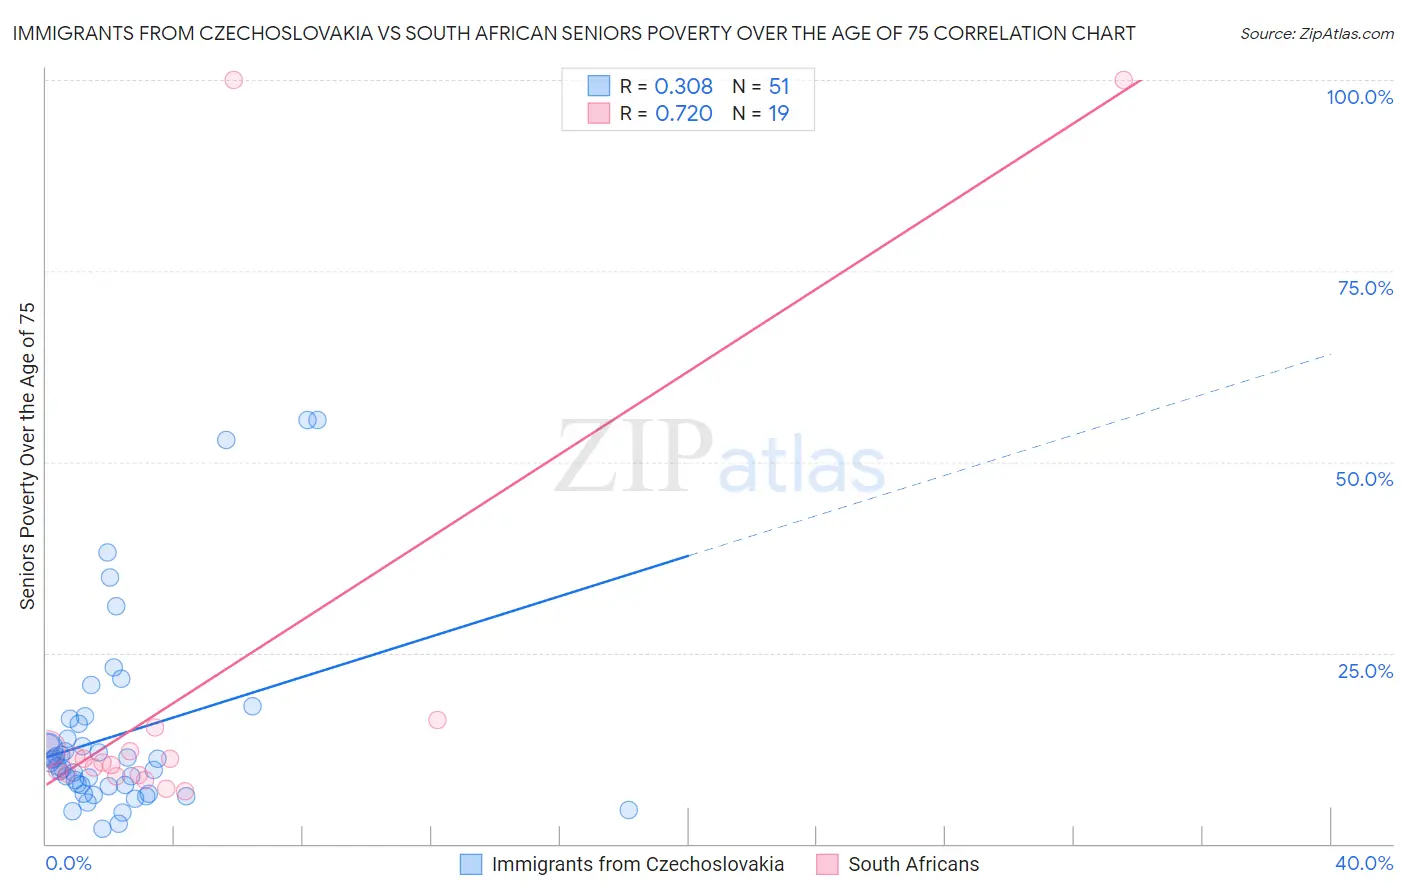 Immigrants from Czechoslovakia vs South African Seniors Poverty Over the Age of 75